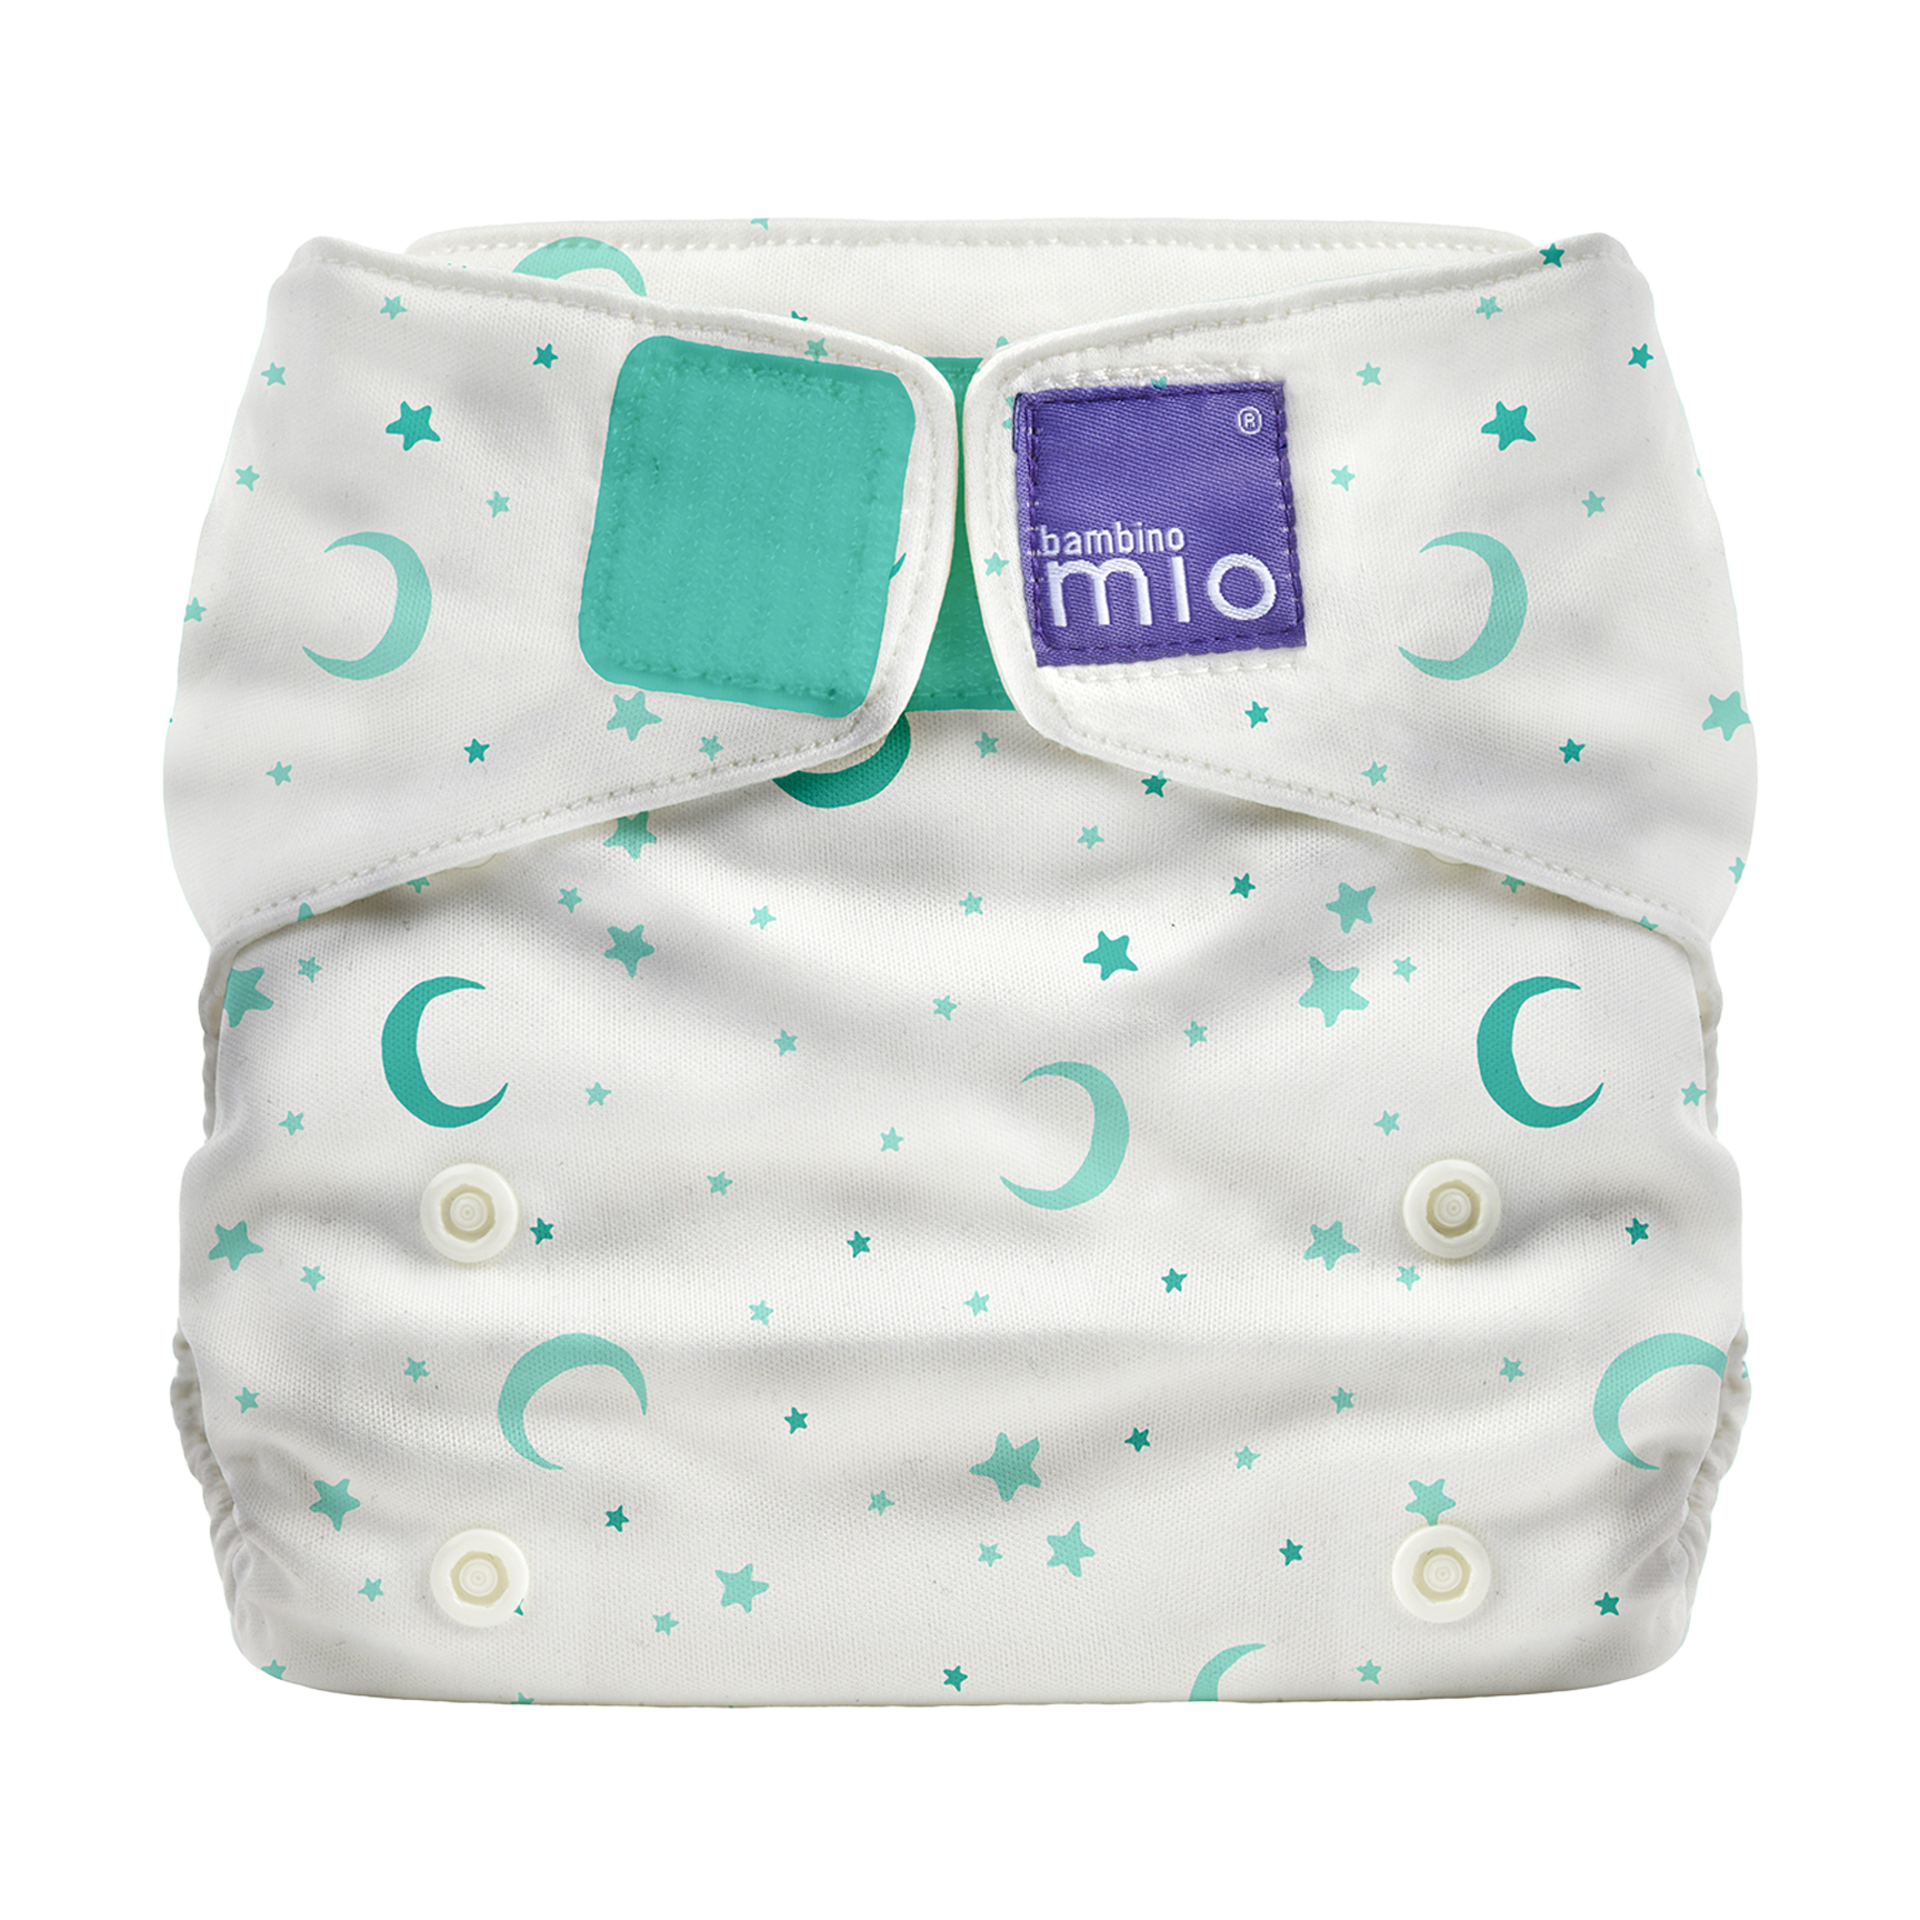 reusable washable baby diapers